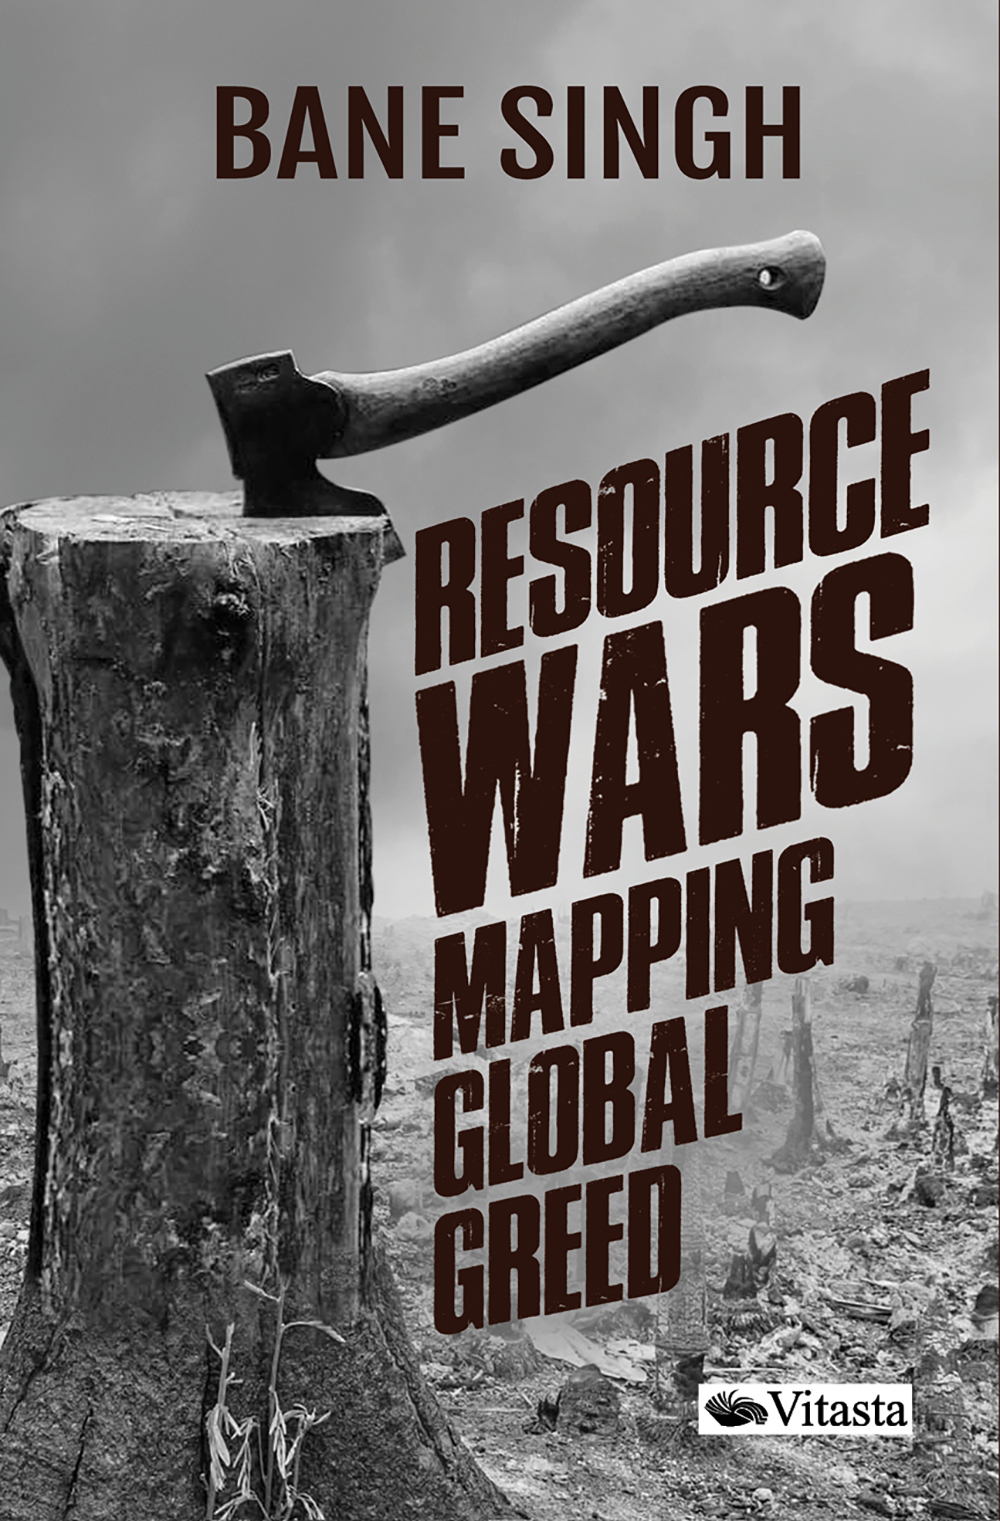 Resource Wars Mapping Global Greed